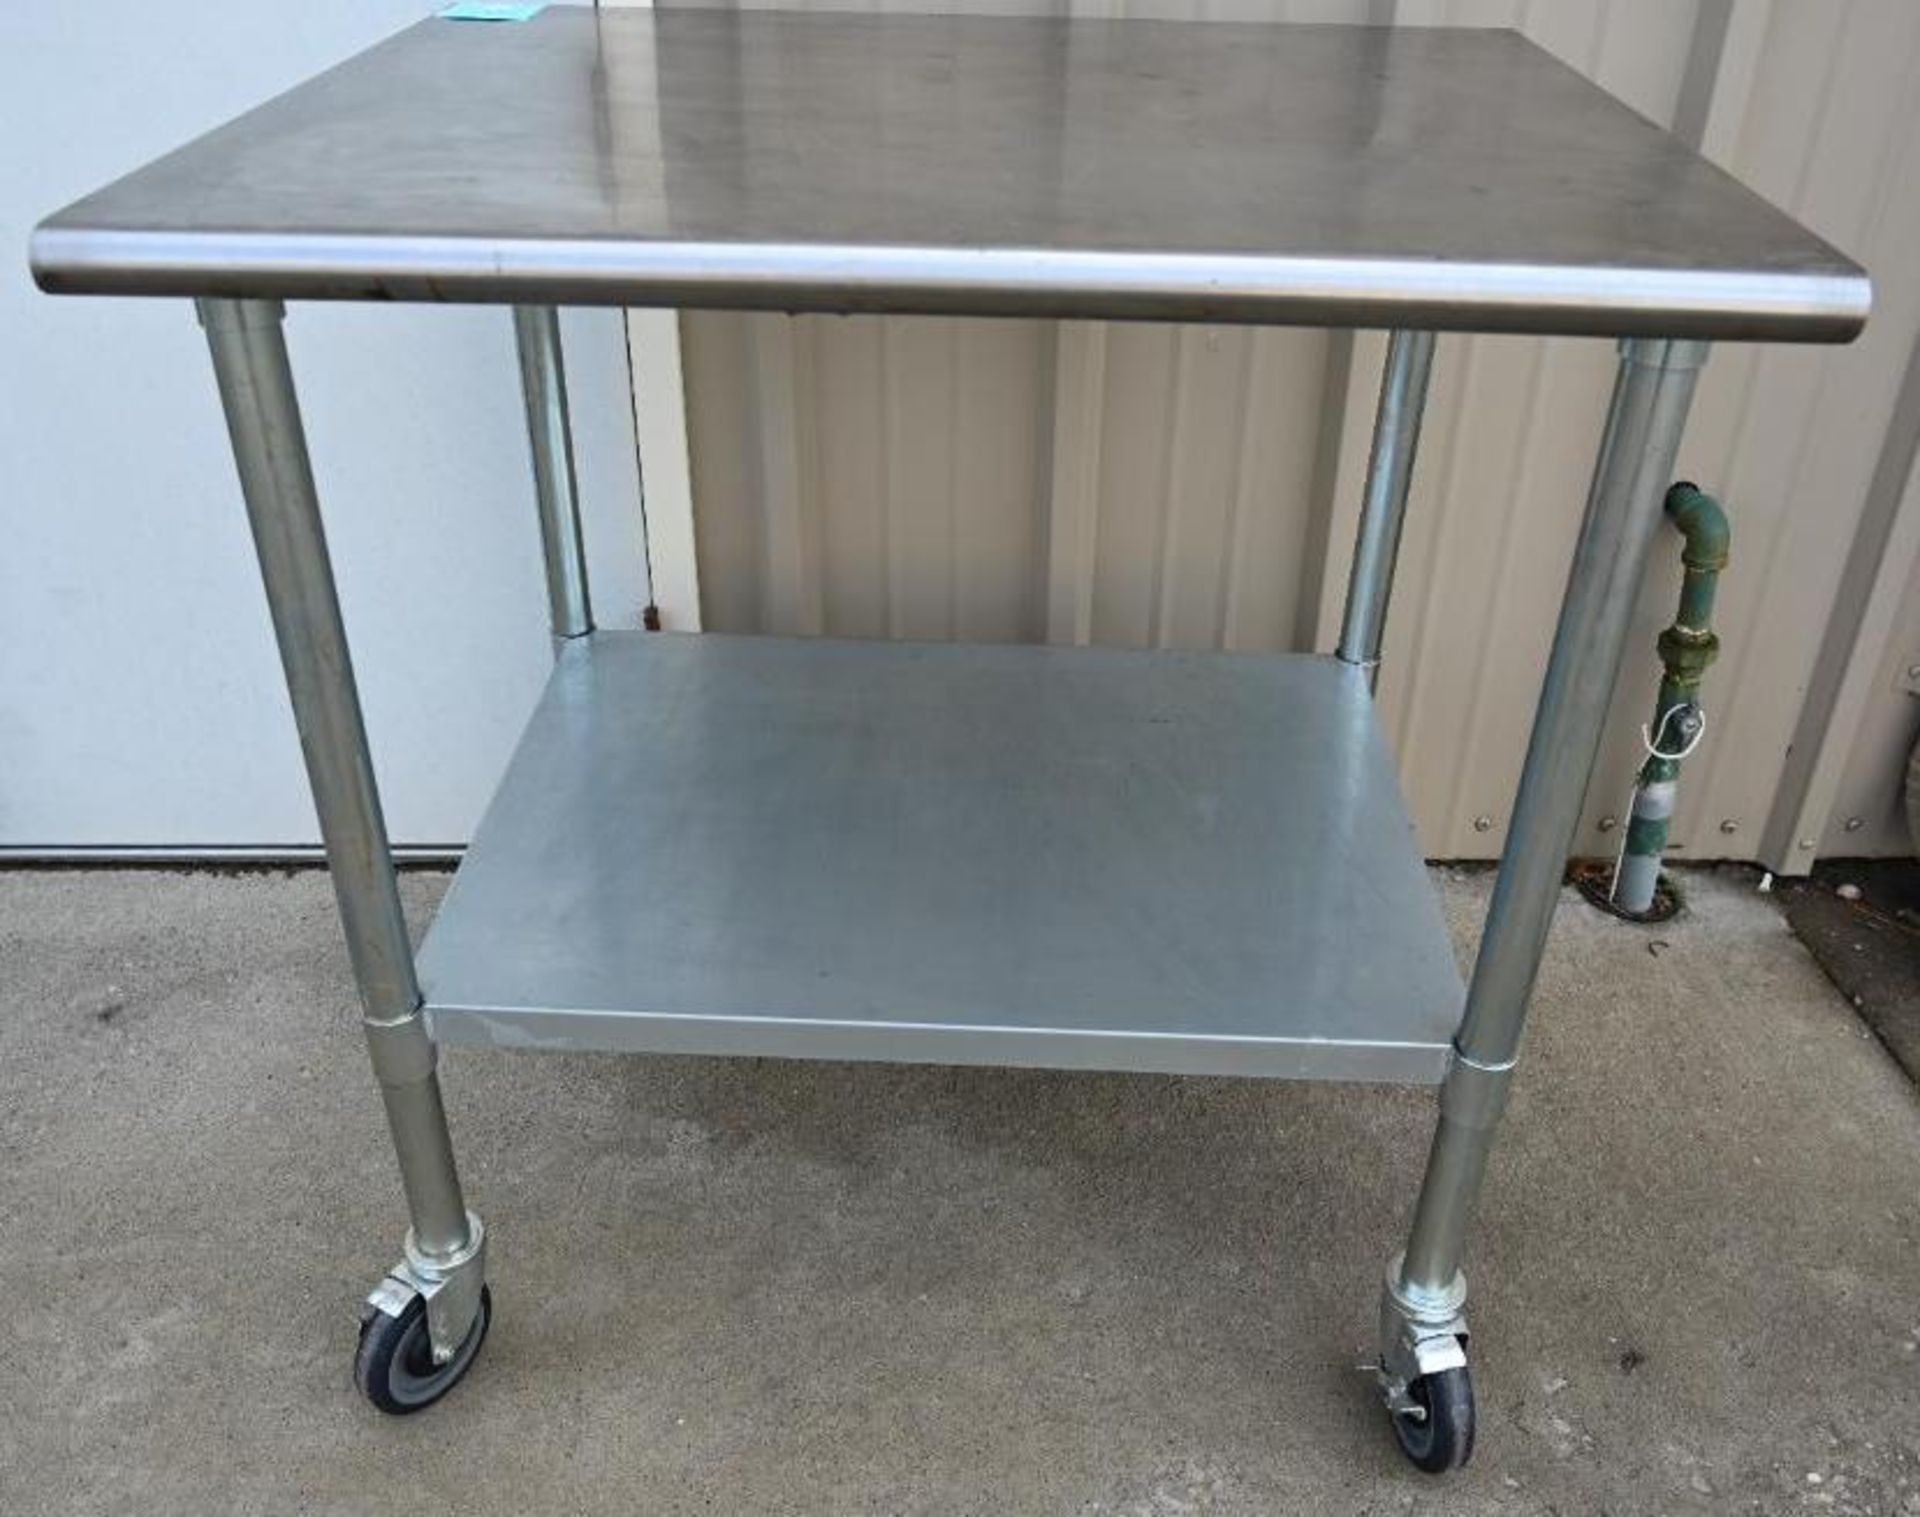 NSF Stainless Steel Work Table with Casters - Image 8 of 8